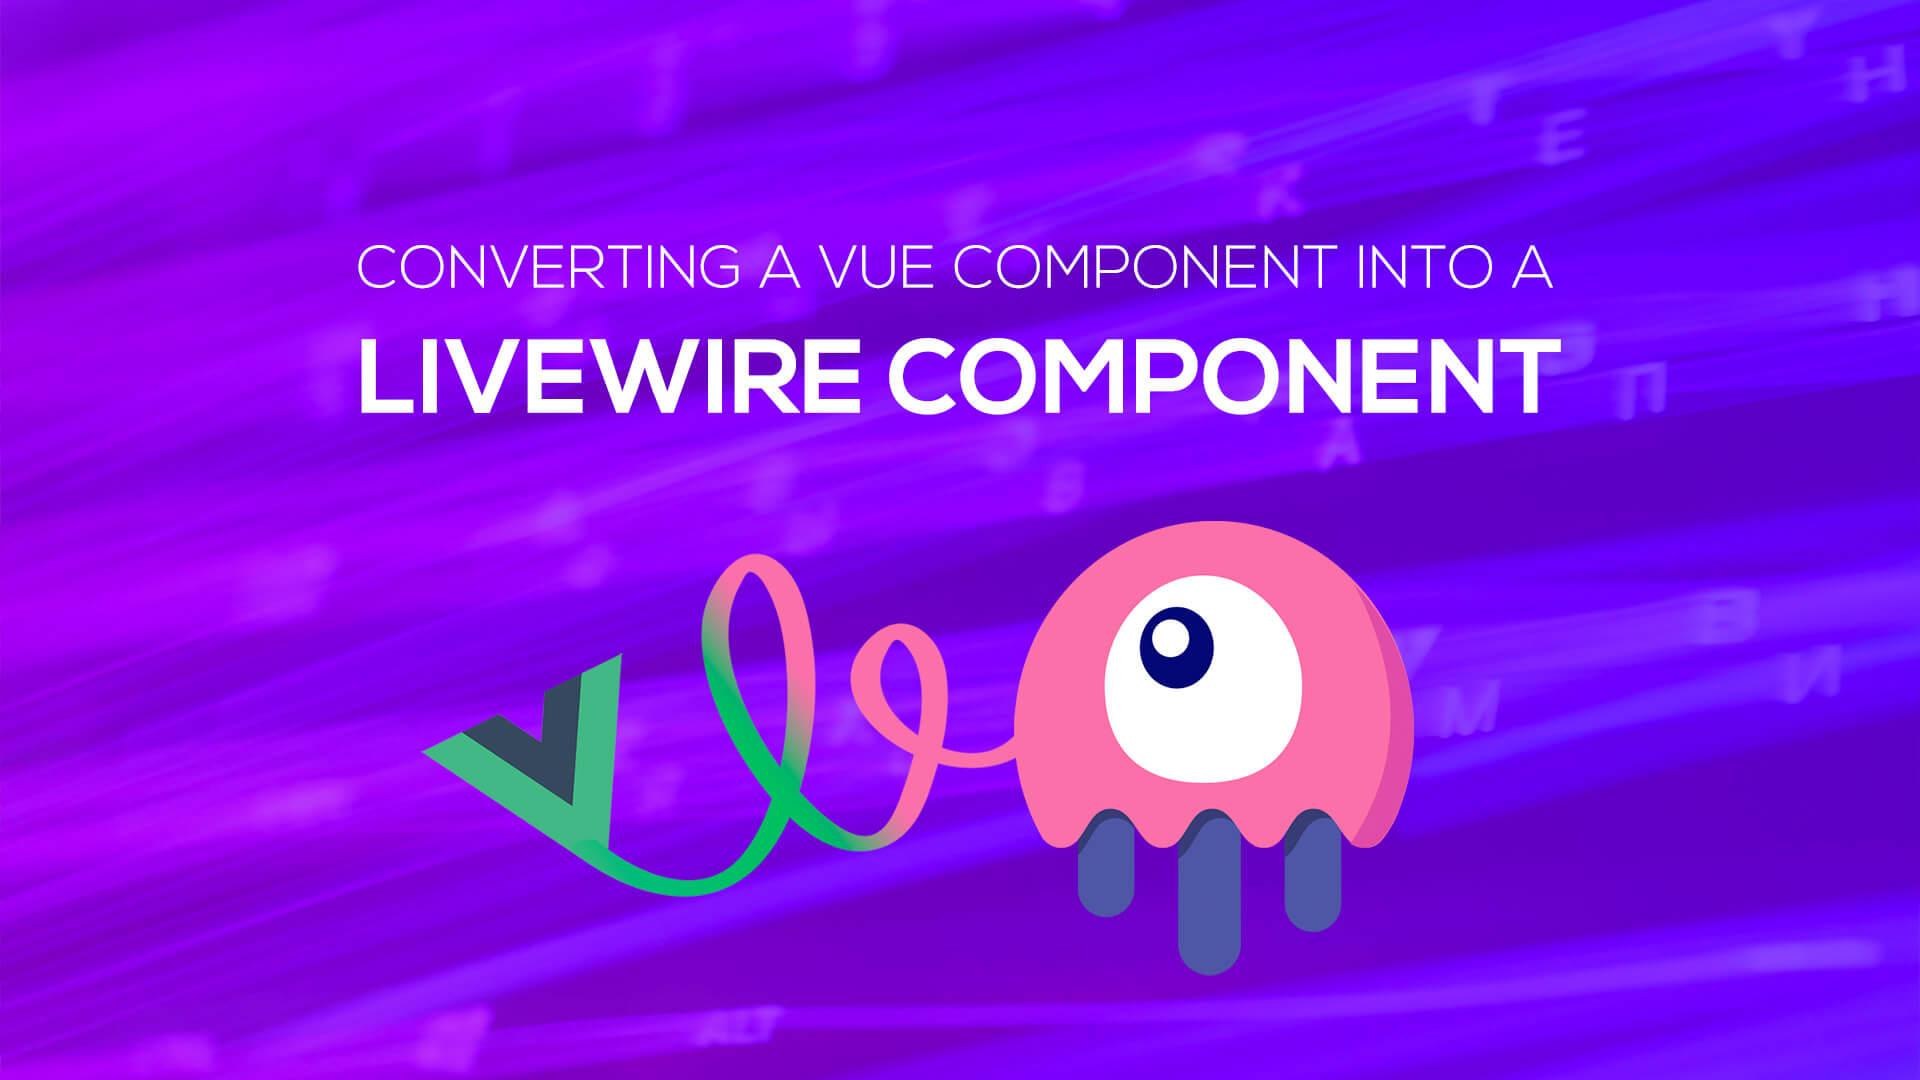 Converting Vue into Livewire